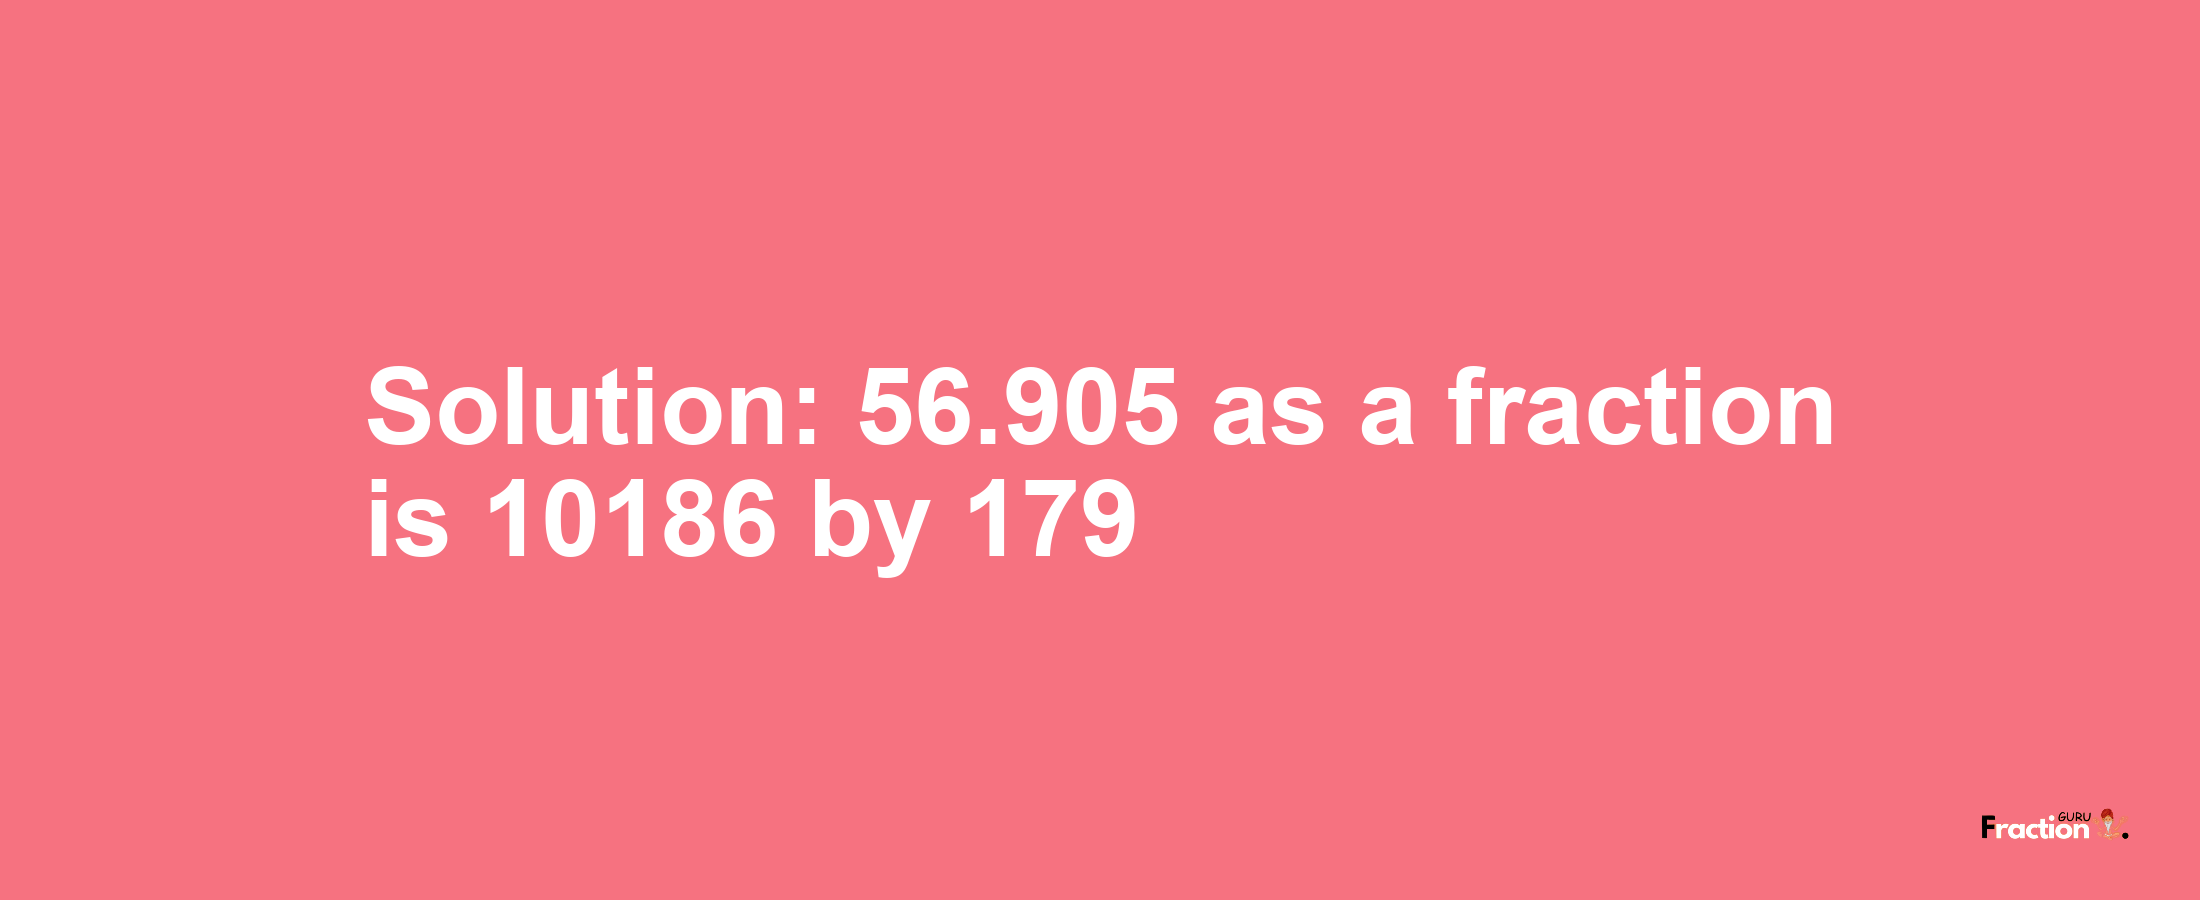 Solution:56.905 as a fraction is 10186/179